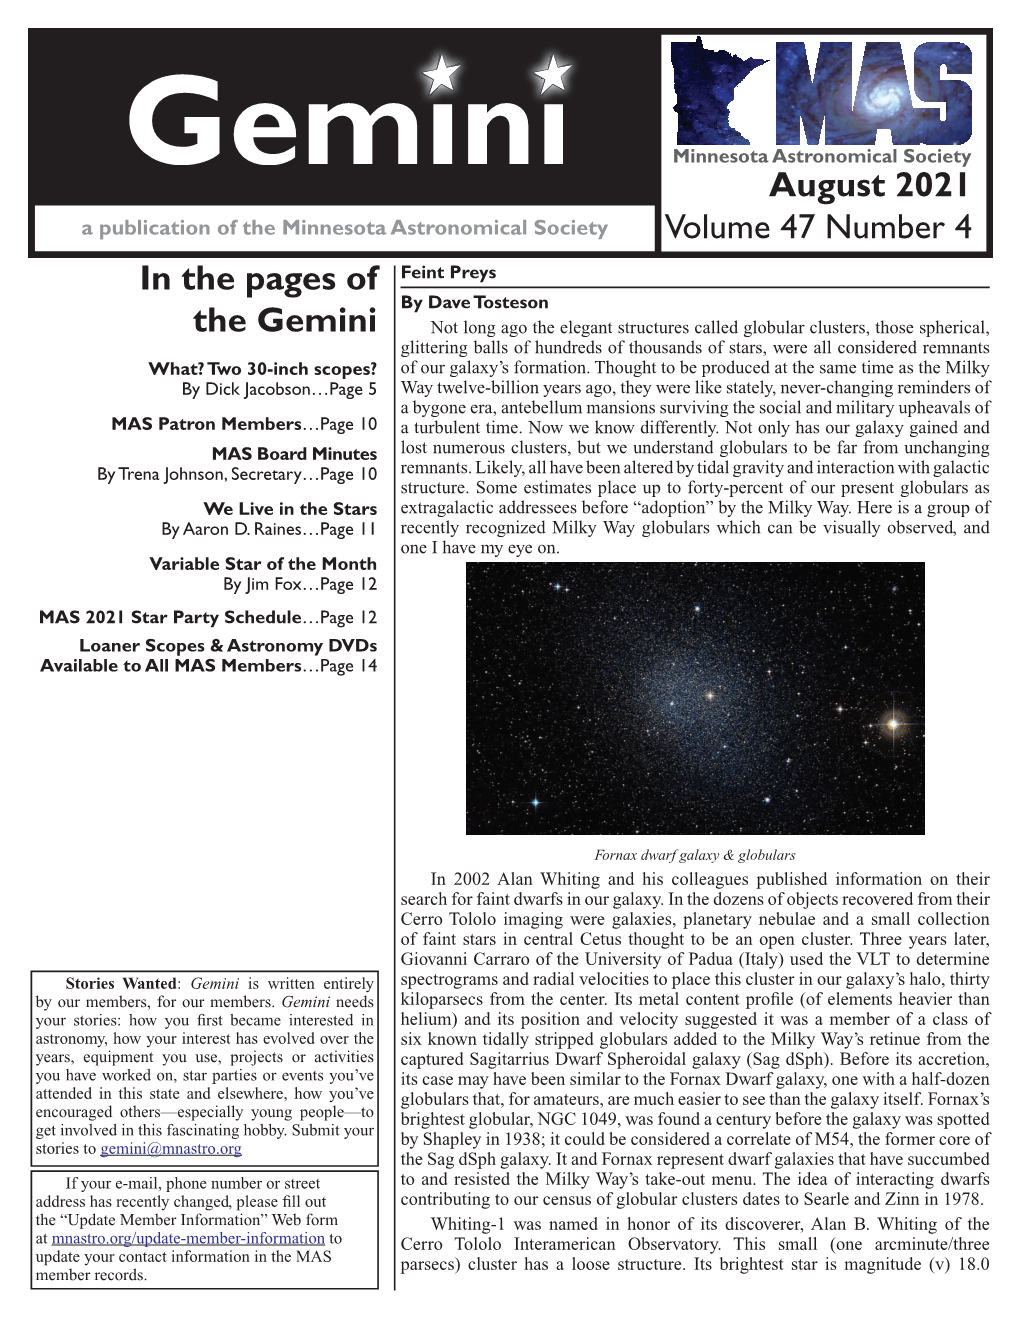 August 2021 Volume 47 Number 4 in the Pages of the Gemini